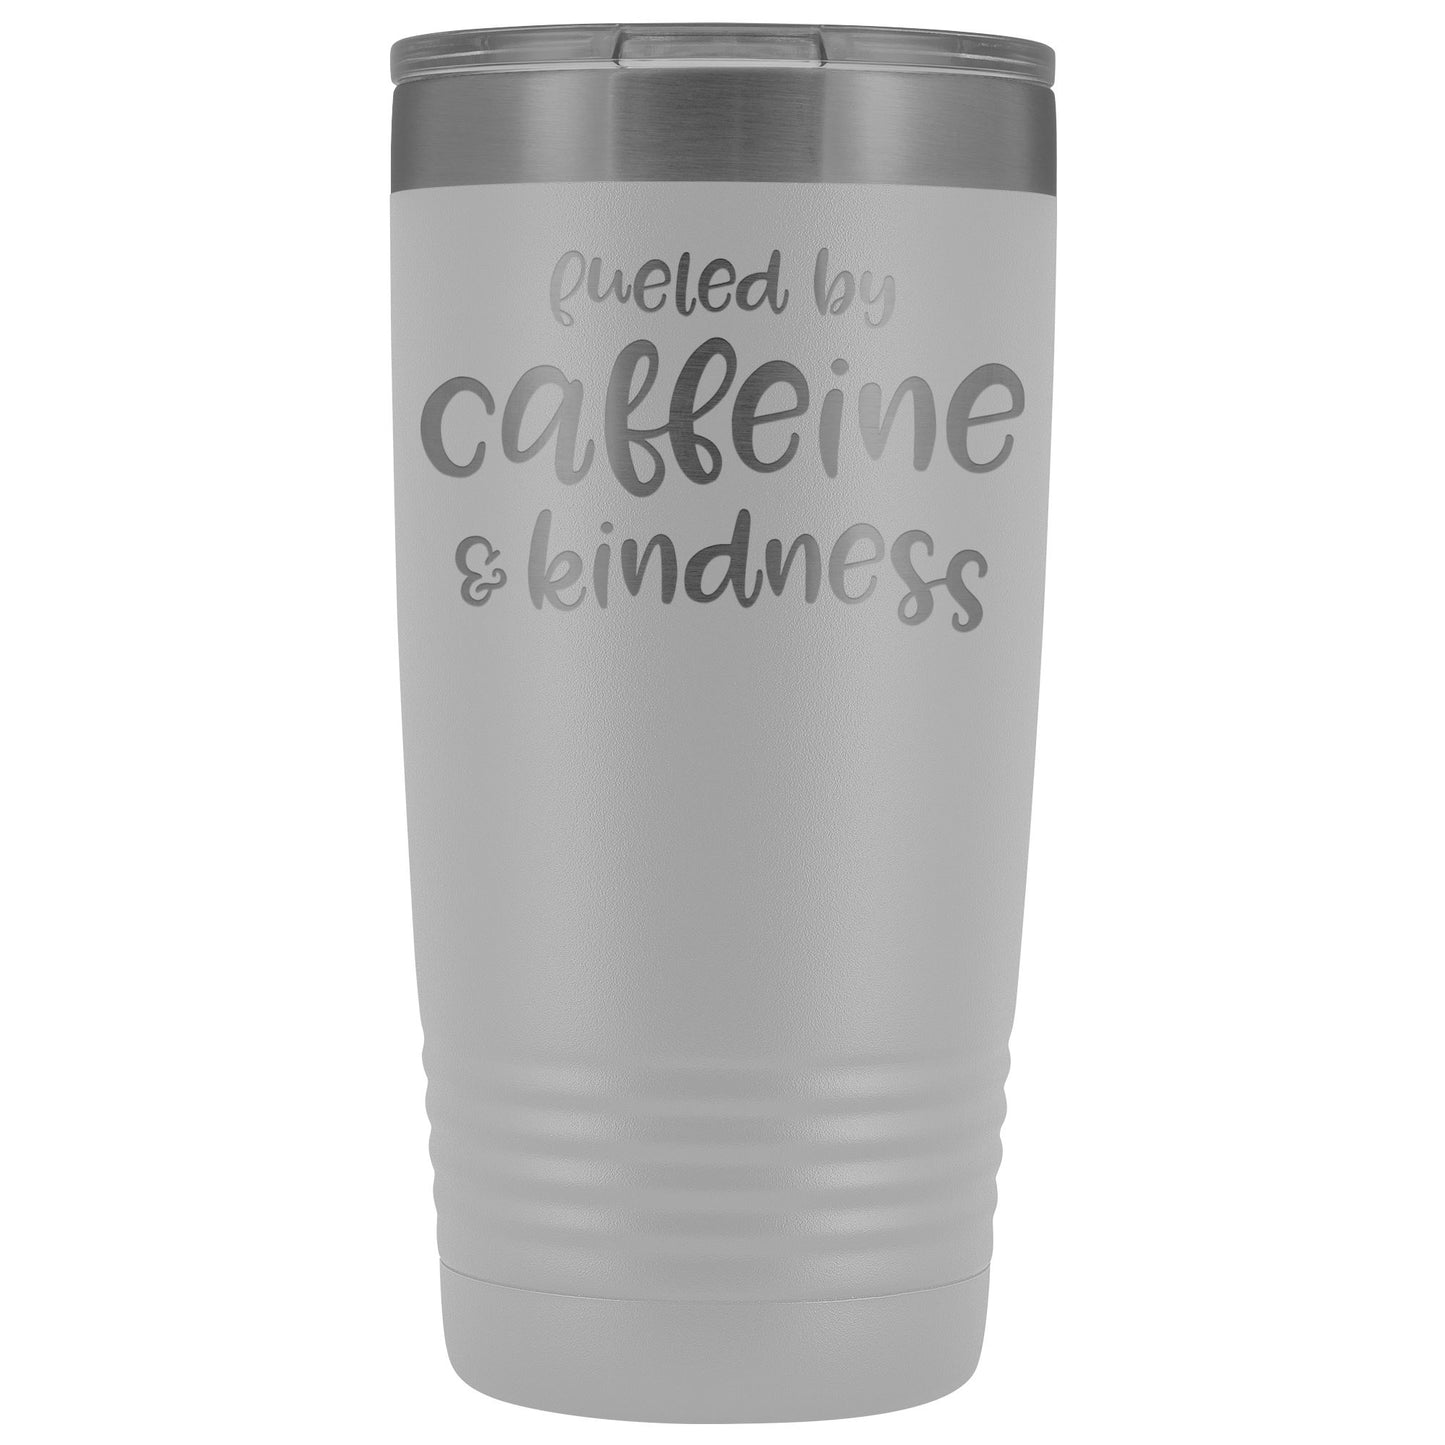 Fueled by Caffeine & Kindness 20oz Insulated Coffee Tumbler